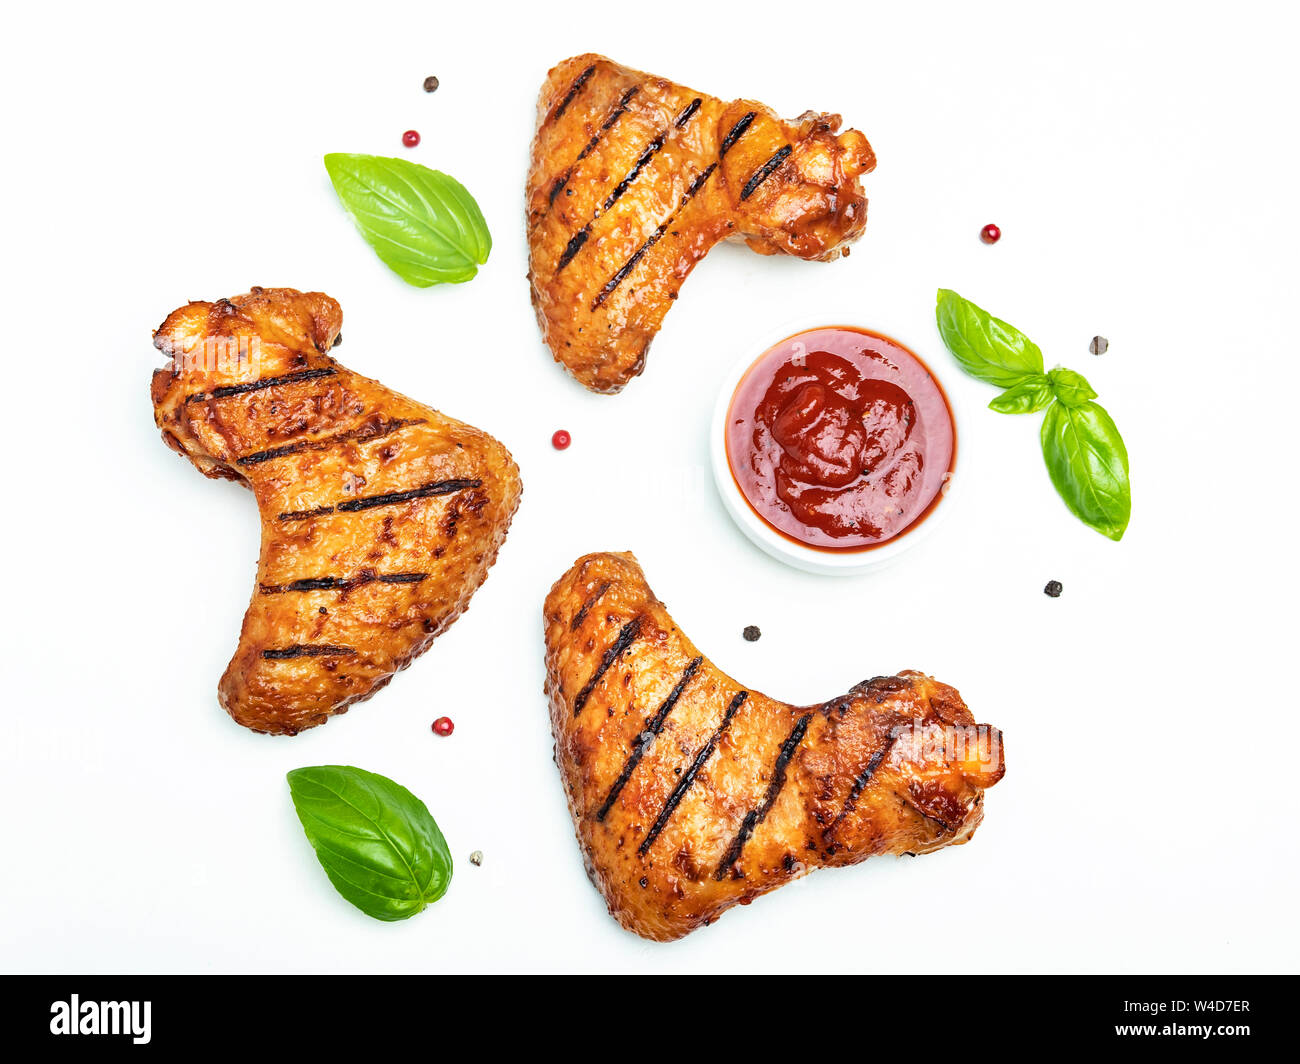 grilled chicken wings, red bbq sauce basil spices on white background Stock Photo